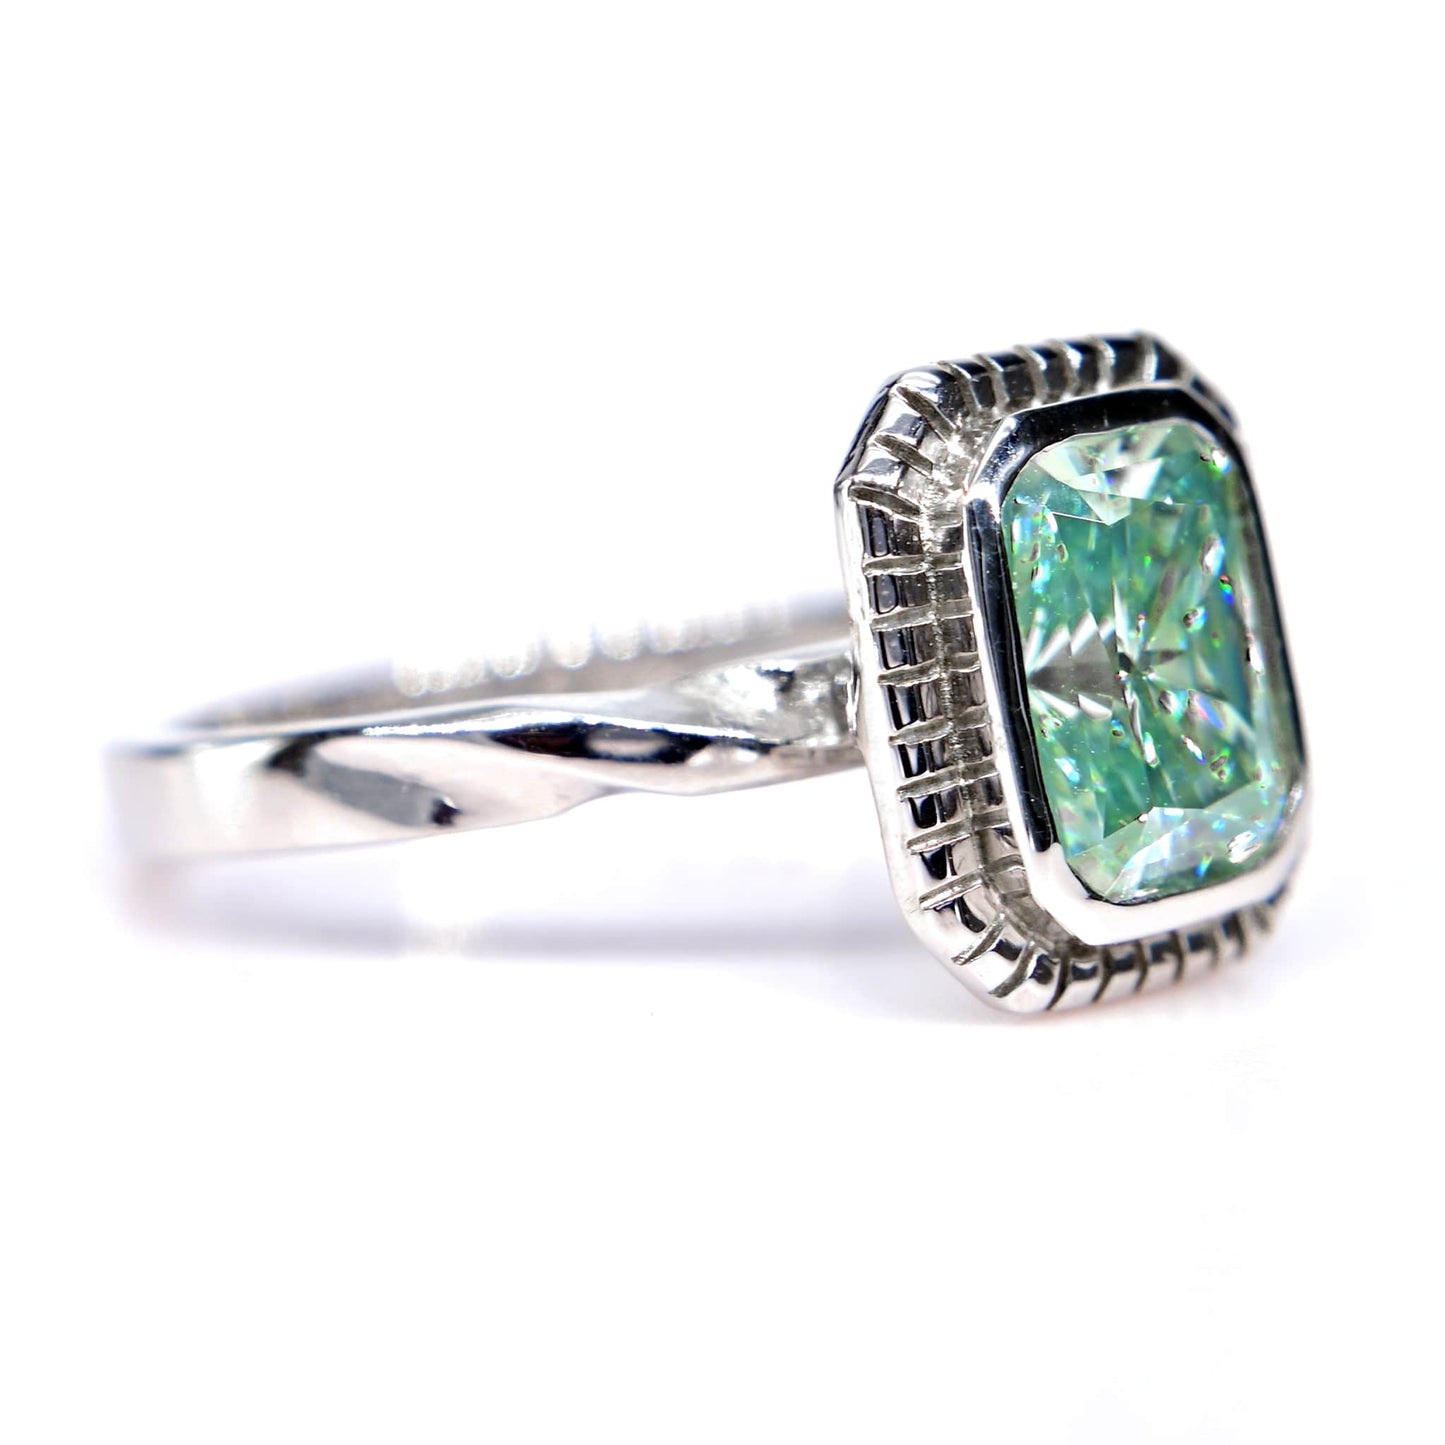 Teal moissanite ring in Chiang Mai, Thailand